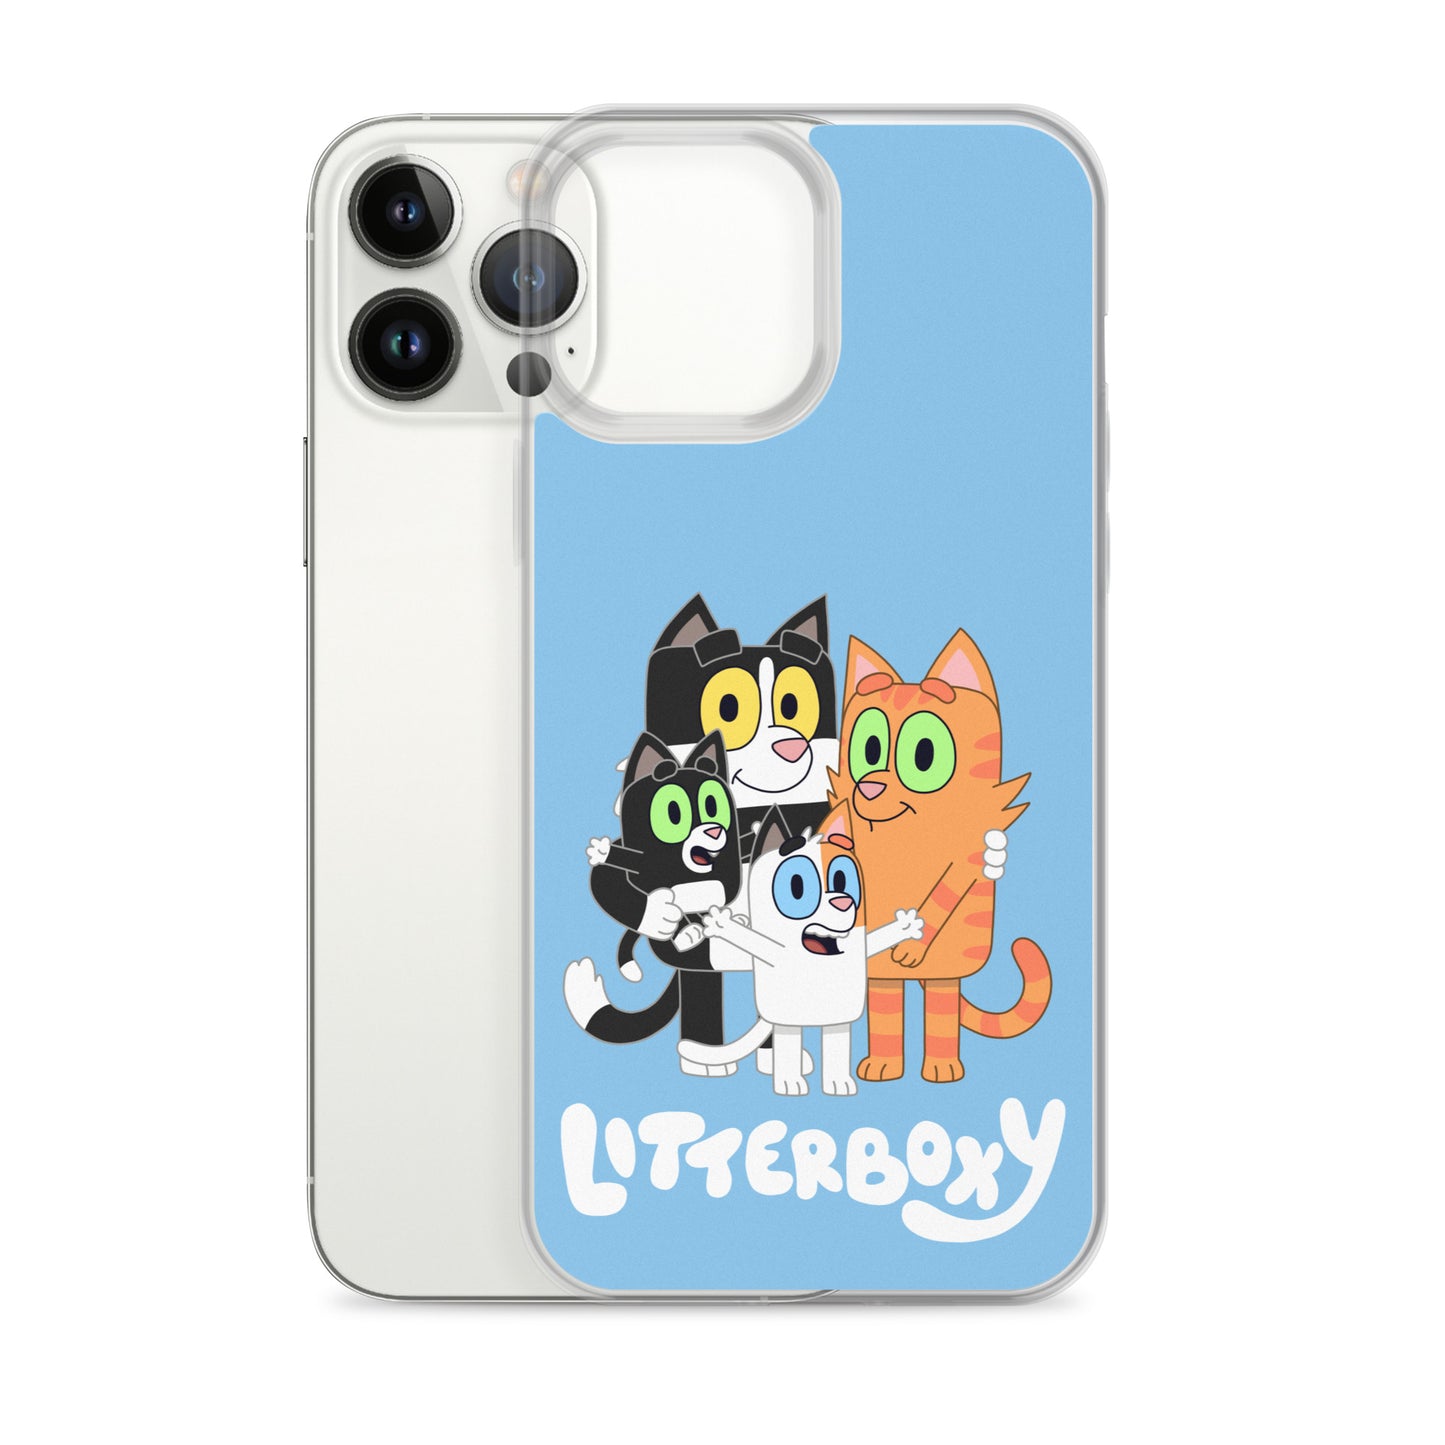 Litterboxy Family iPhone Case